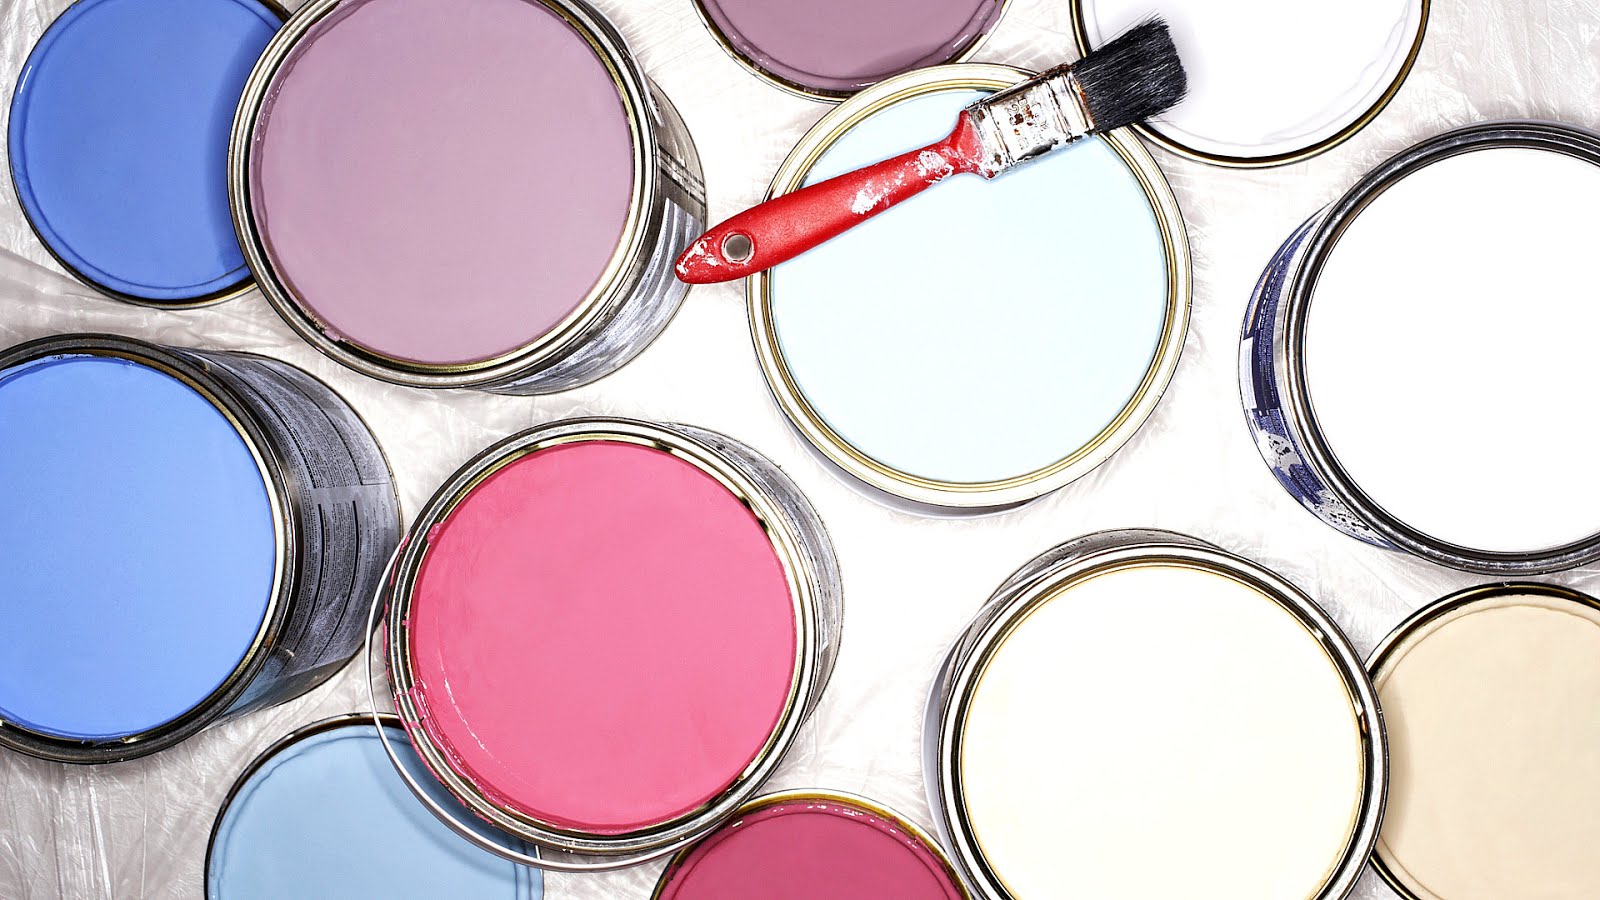 Painting - Interior Painting Supplies - Paint Choices